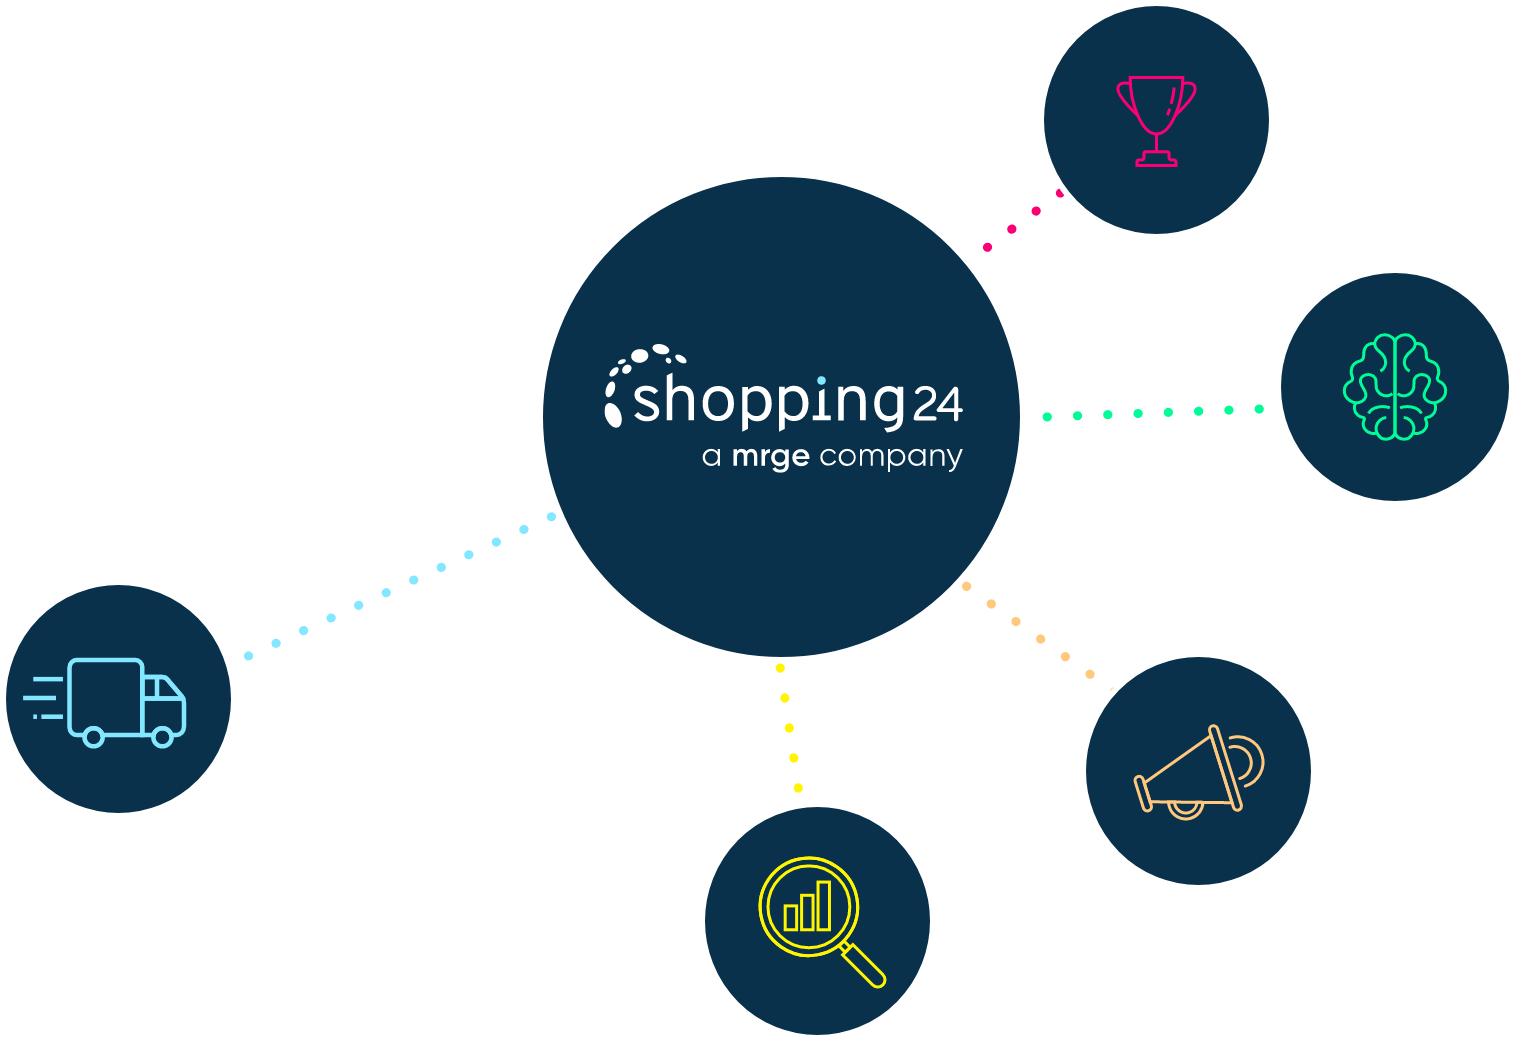 Visualisation of the shopping24 commerce network with the different business areas.